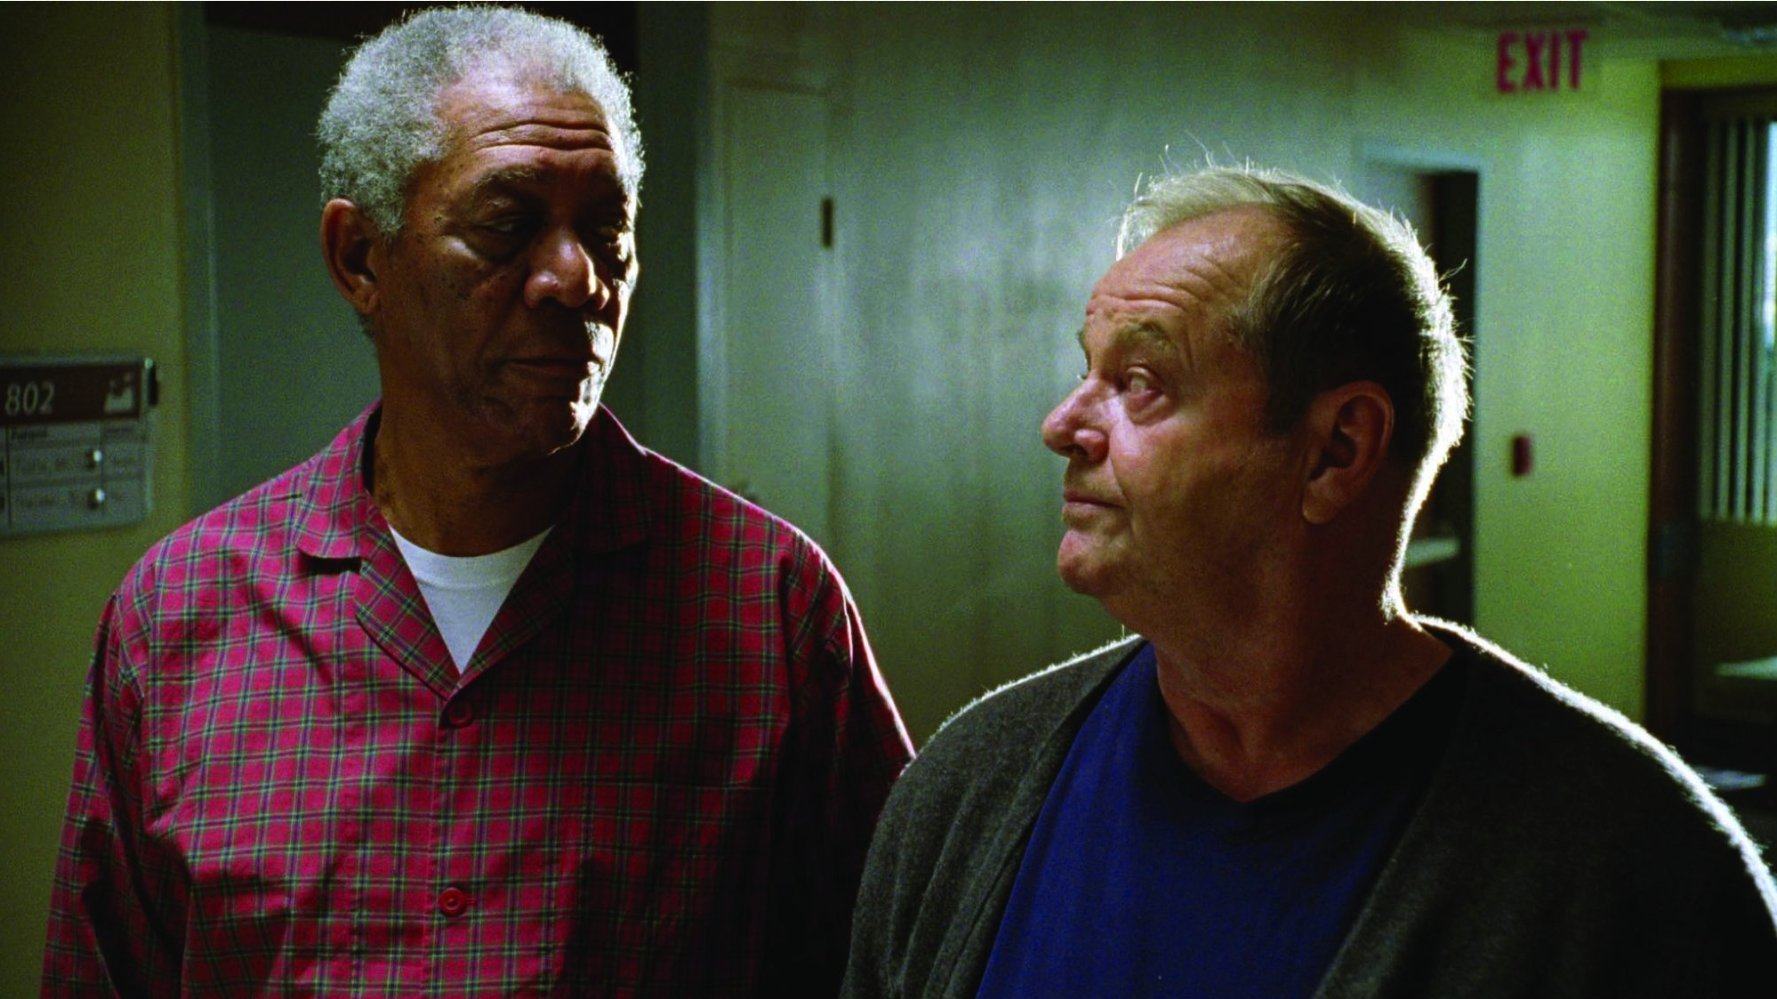 Morgan Freeman and Jack Nicholson look at each other in The Bucket List